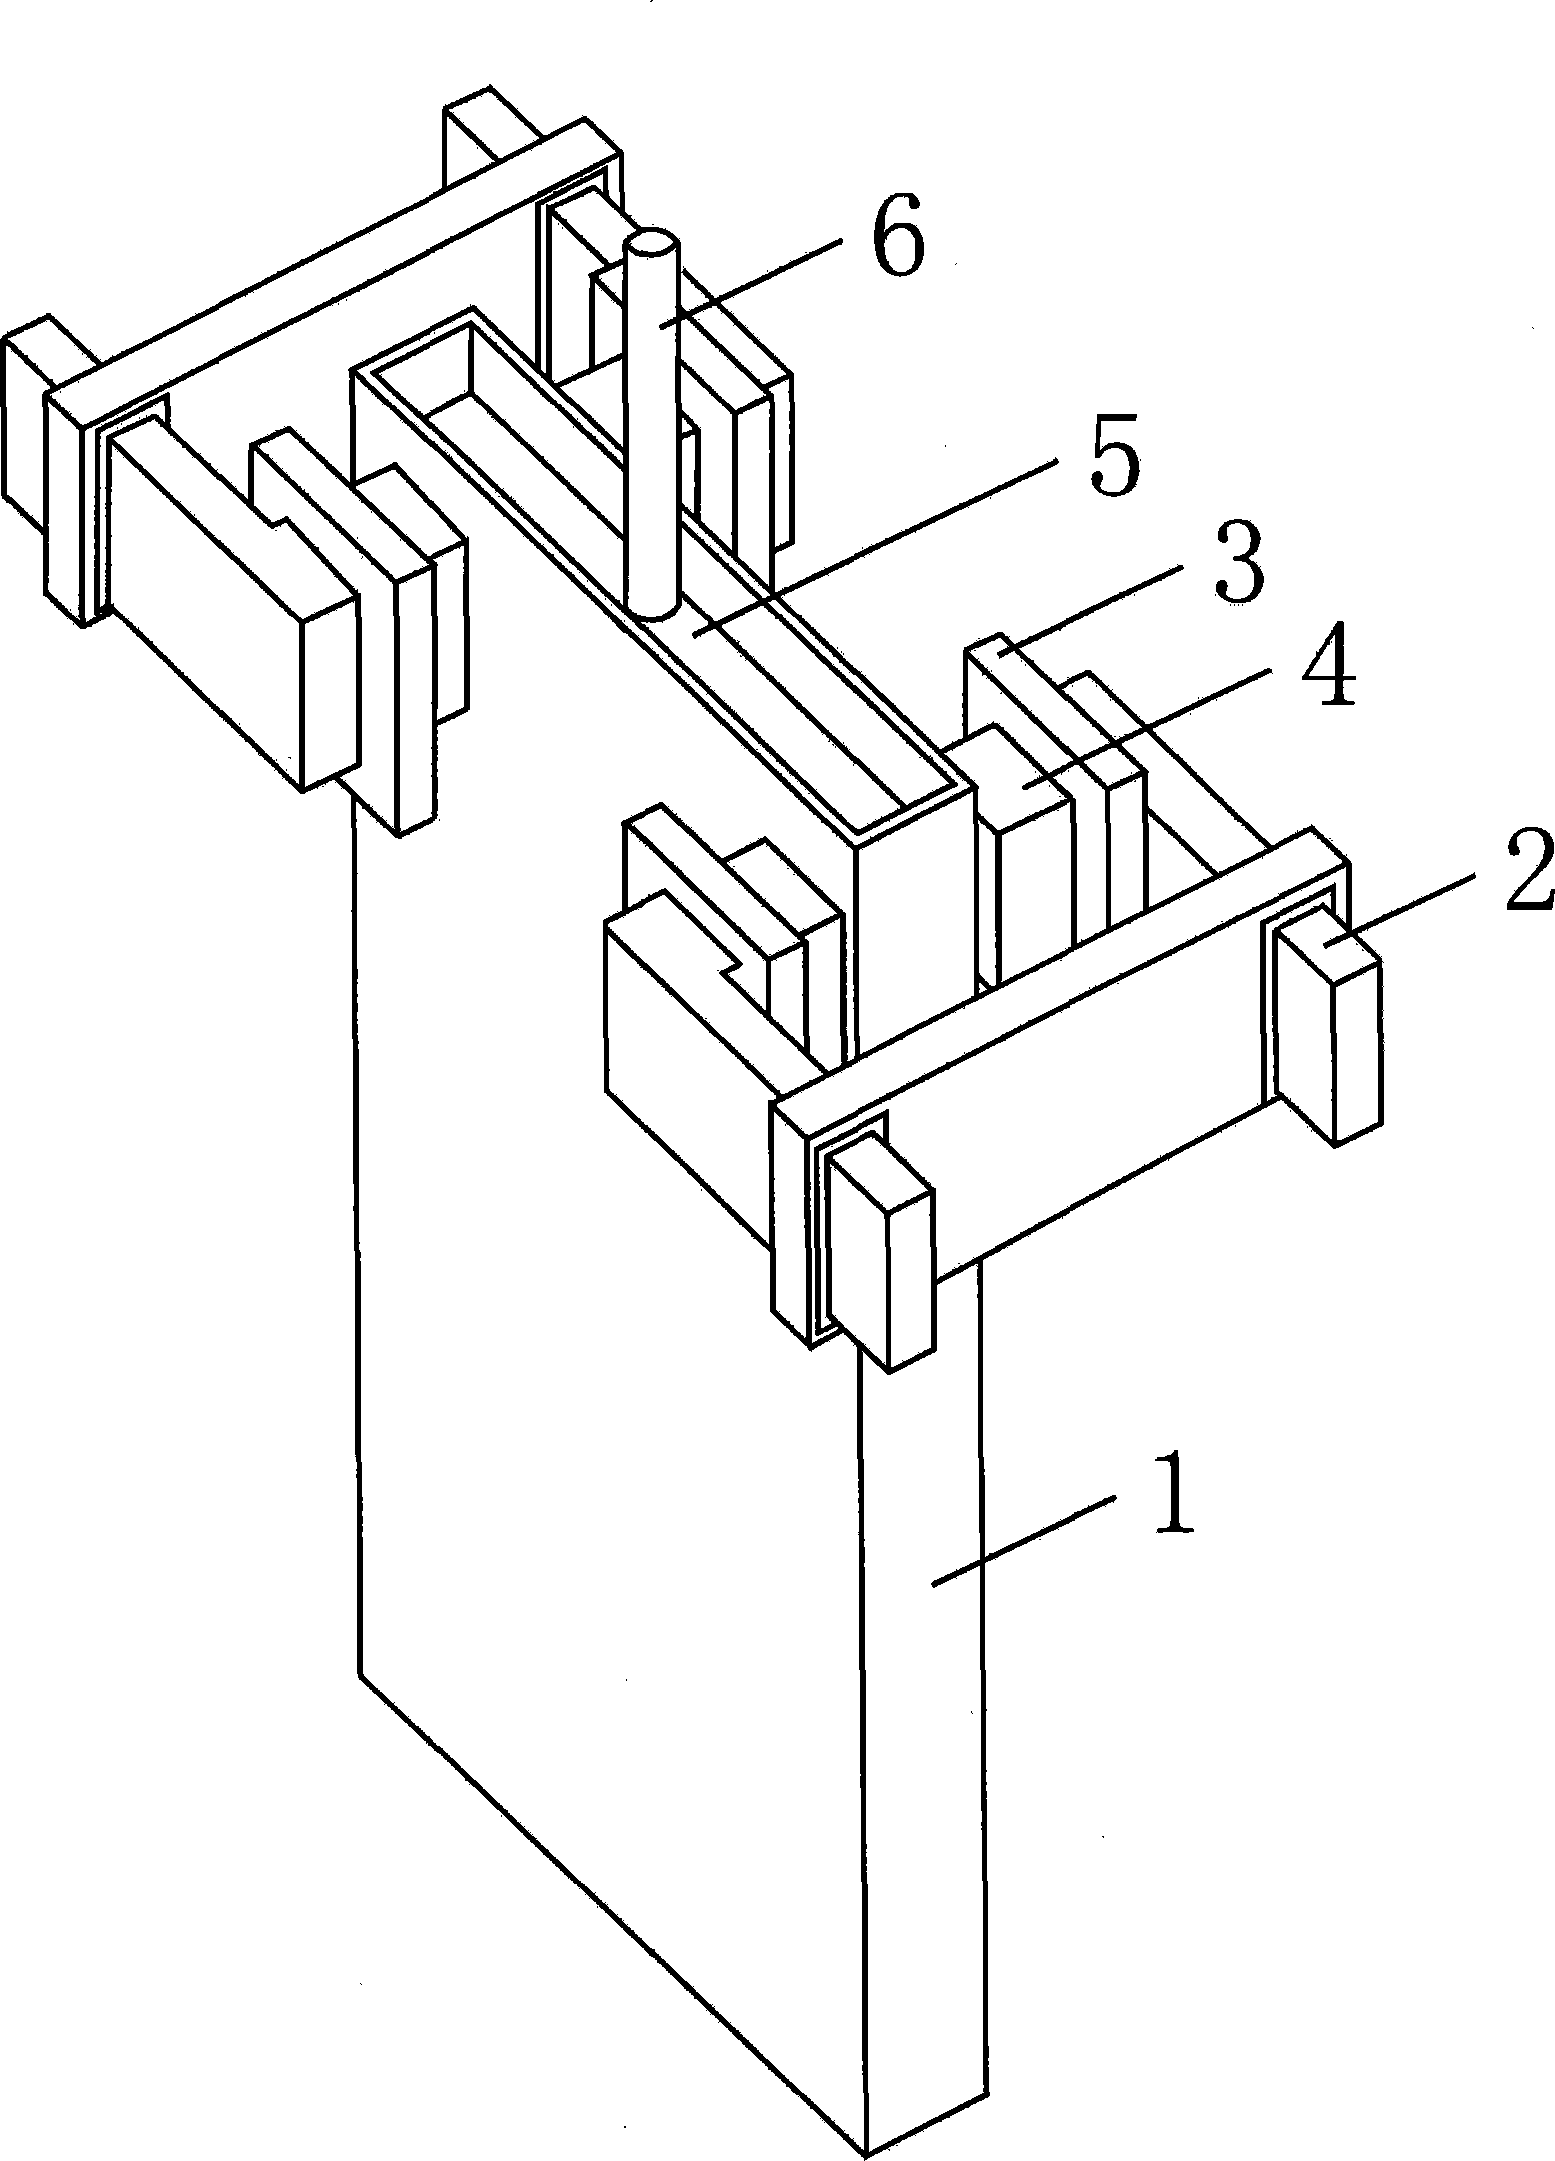 Electro-magnetic braking device for controlling molten metal flow in continuous cast crystallizer